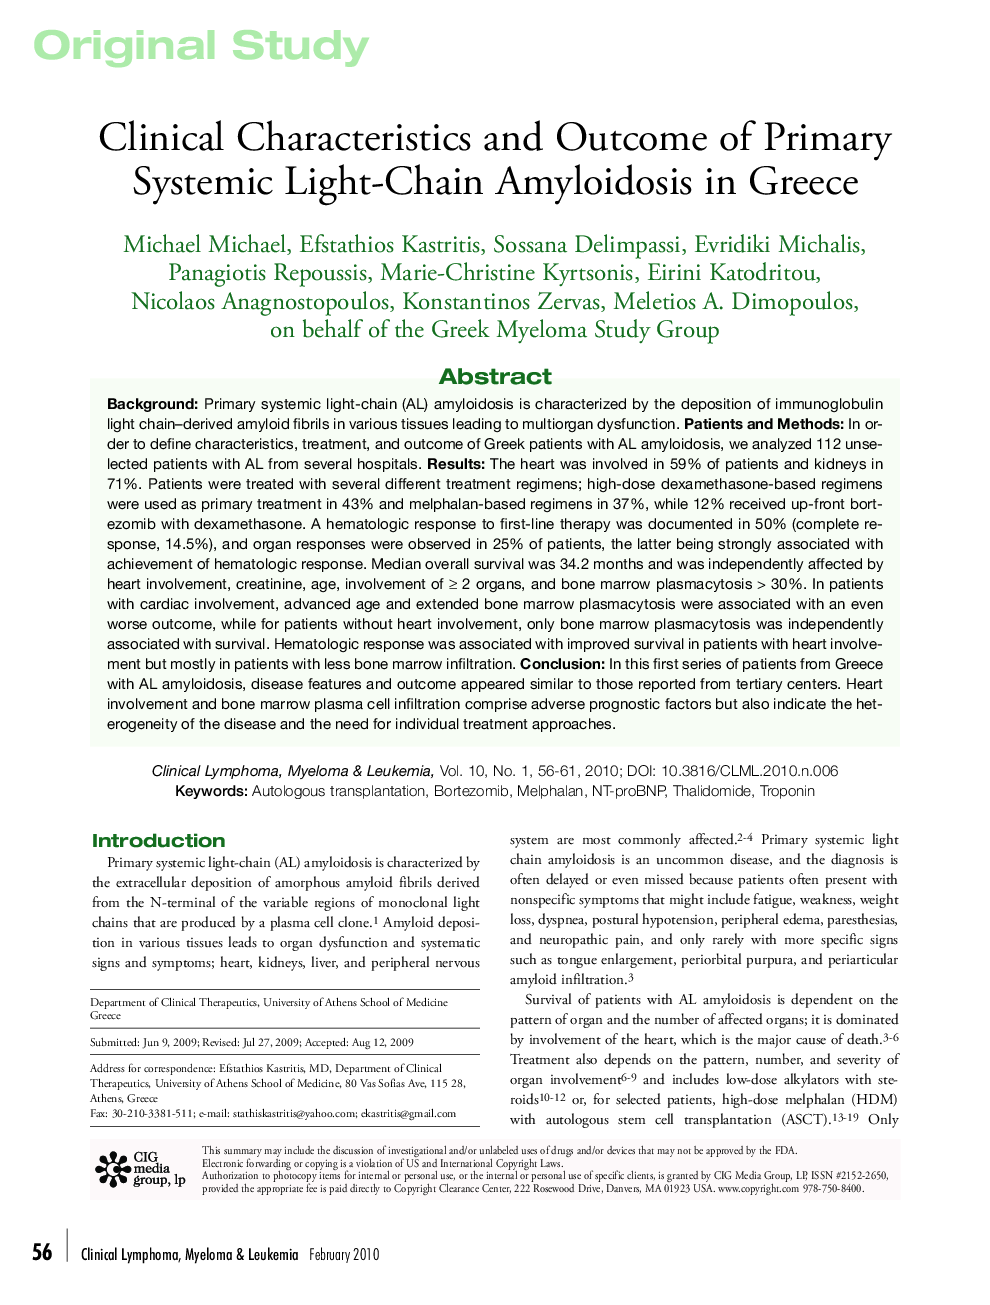 Clinical Characteristics and Outcome of Primary Systemic Light-Chain Amyloidosis in Greece